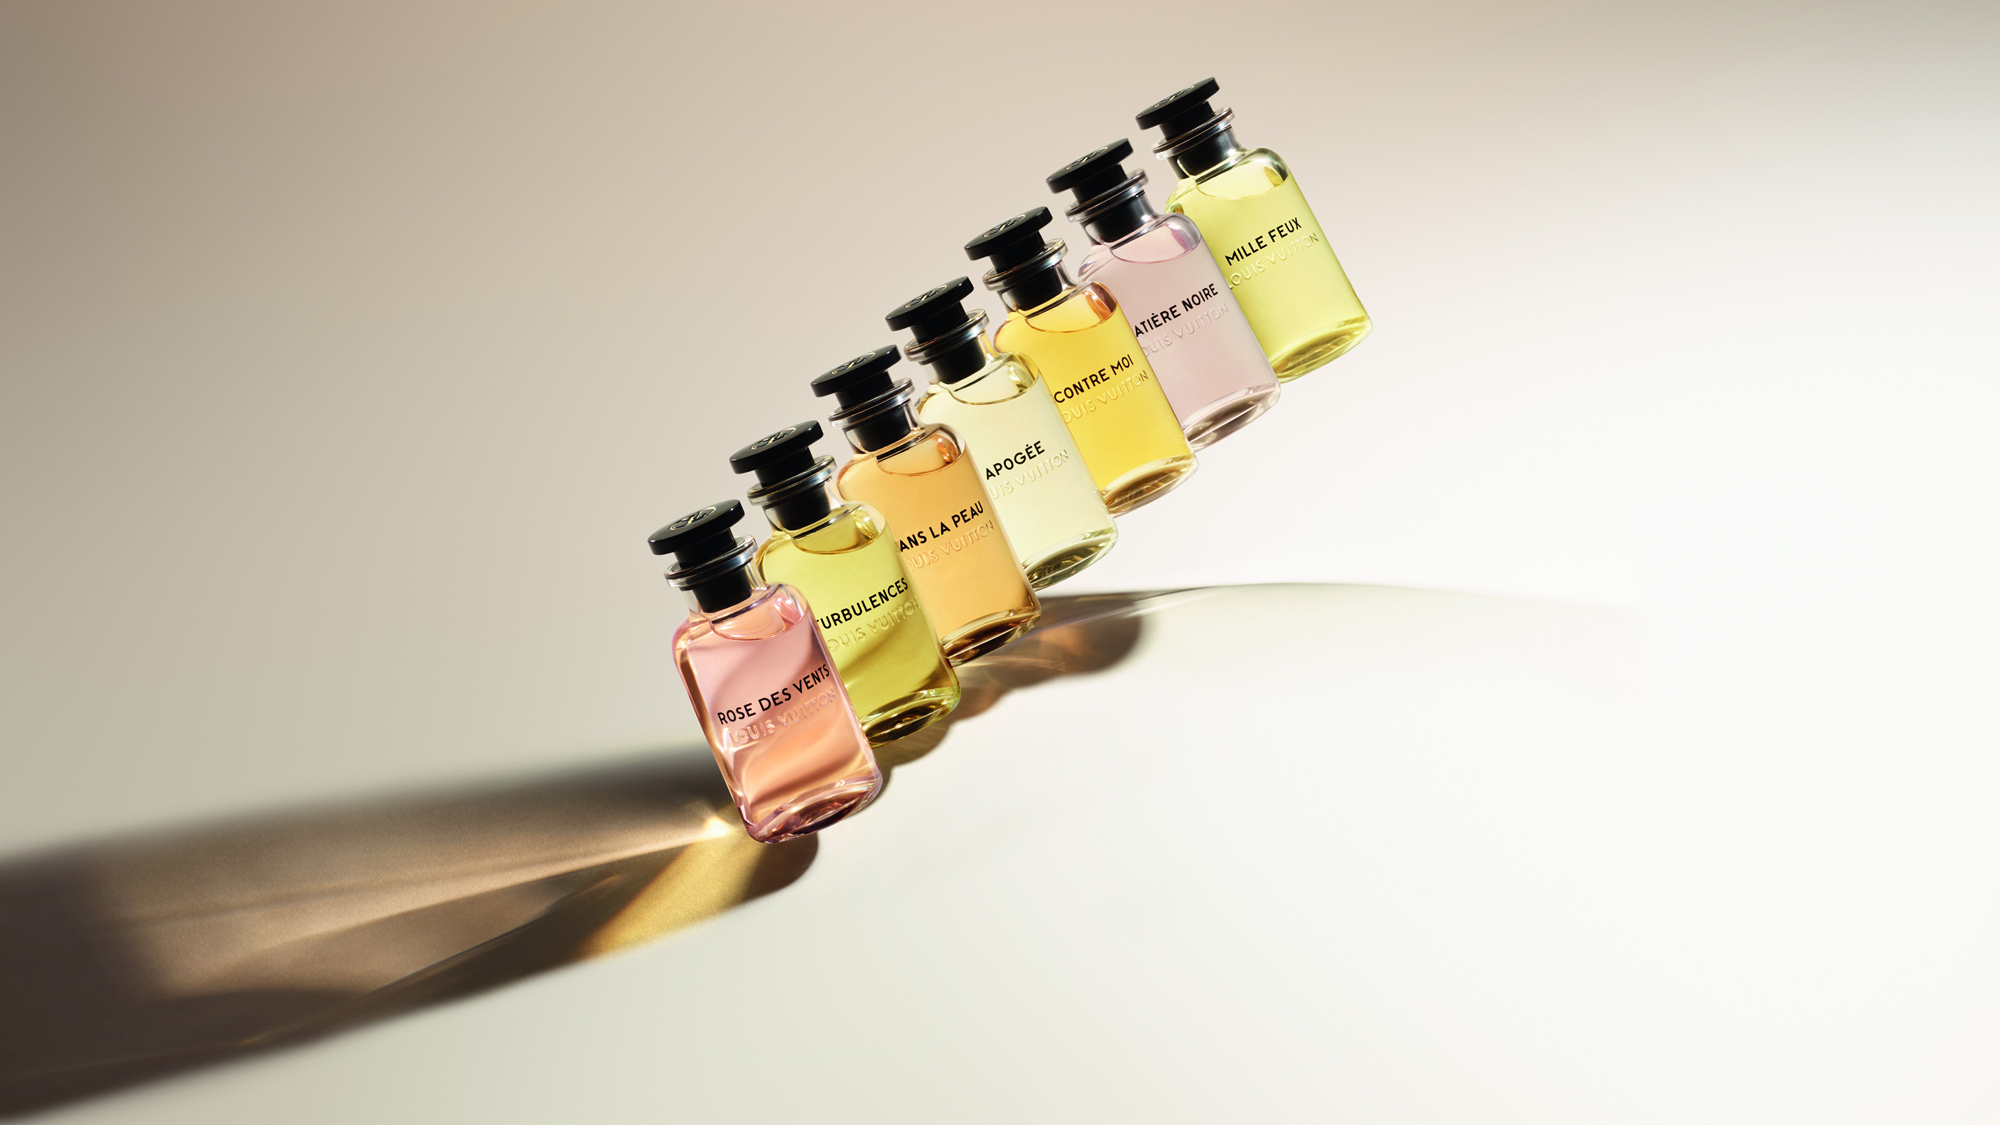 Louis Vuitton Offering Personalized Fragrance Service